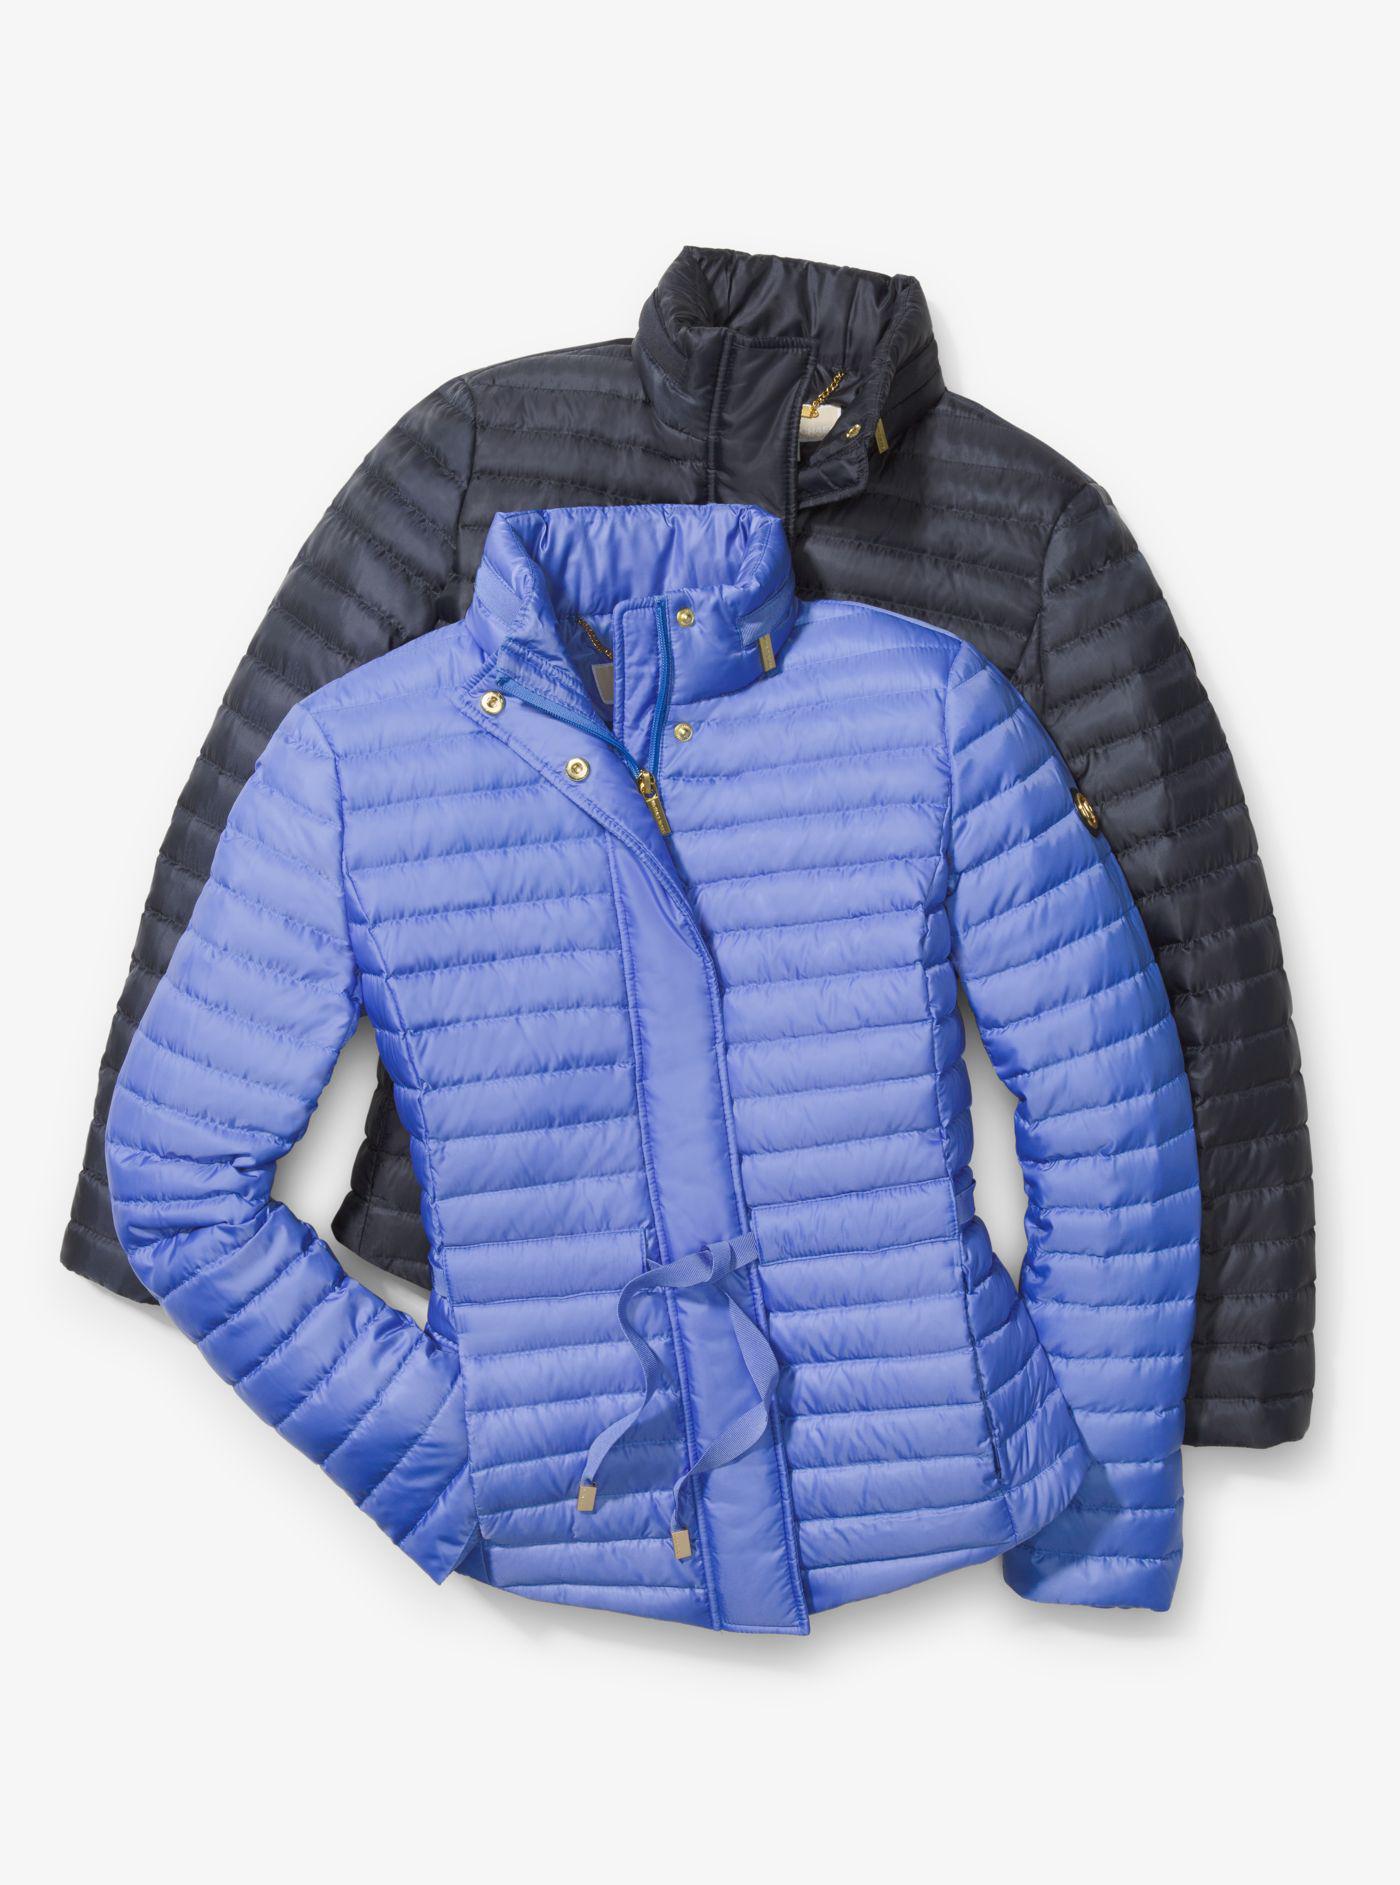 Michael Kors Synthetic Packable Nylon Puffer Jacket in Navy (Blue) | Lyst